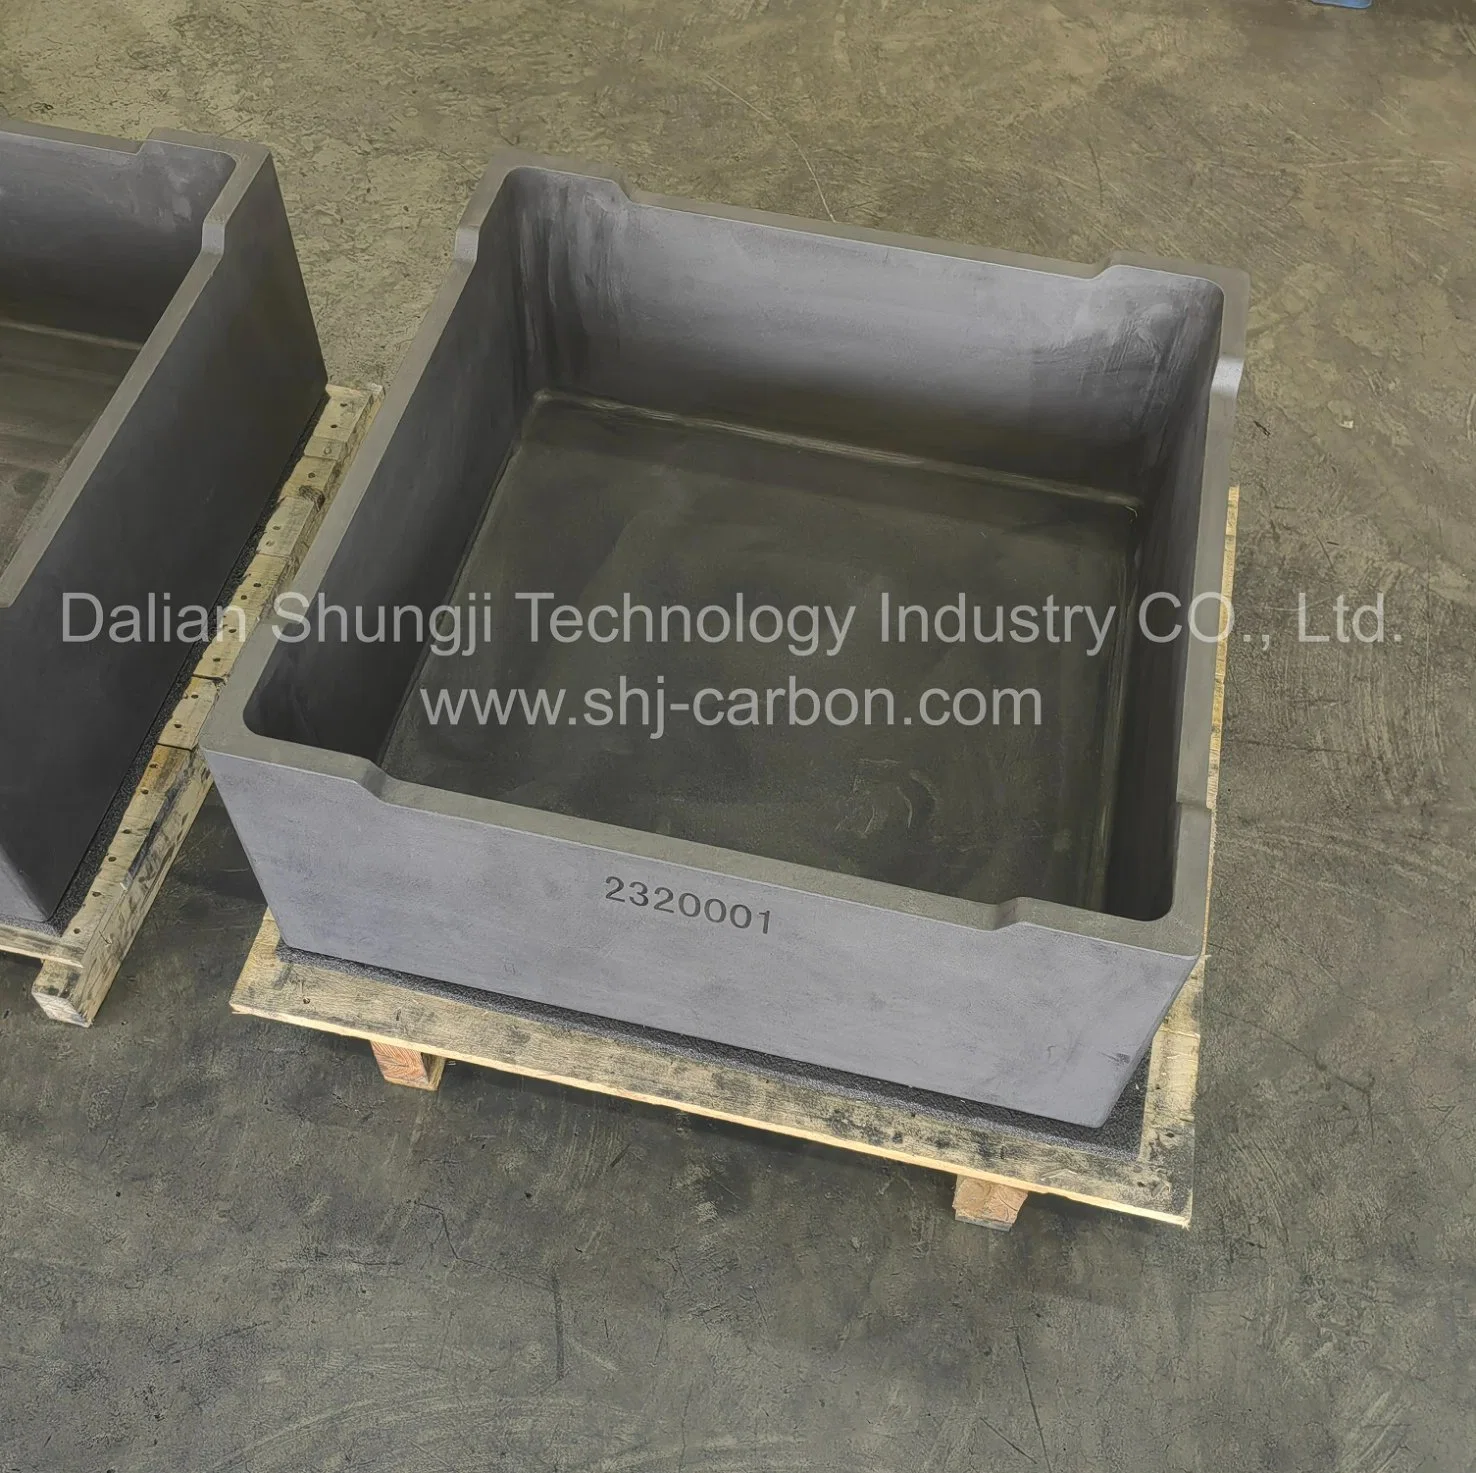 Special Graphite Products /Forging/Melting/Casting for Graphite Molds